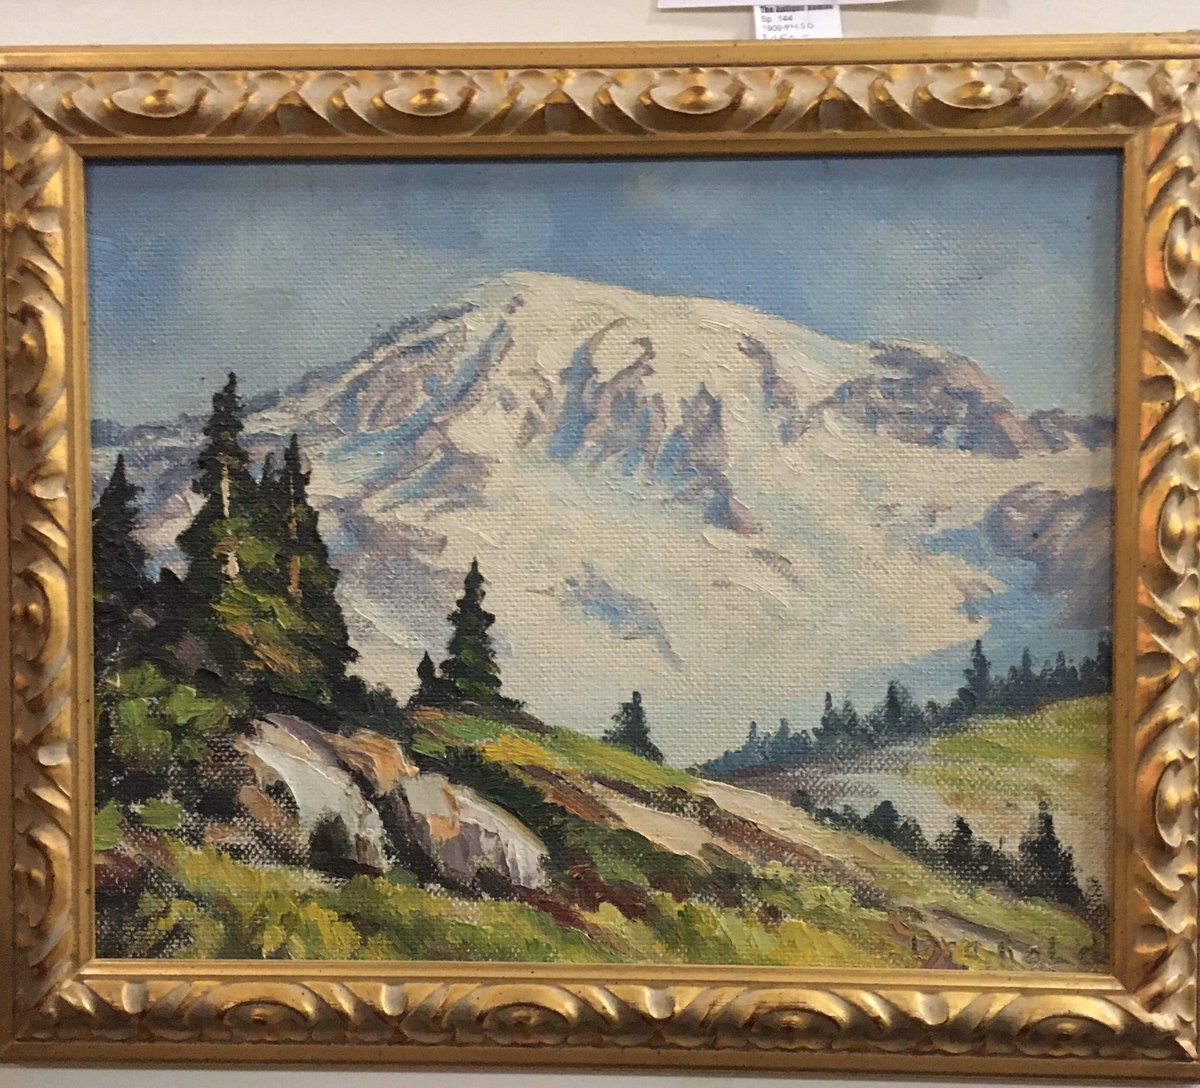 Signed Mt. Rainier painting by Drehold, on Masonite, circa 1950. Burn in Europe, he immigrated to Washington state and became a leading NW Landscape artist. | 
#mtrainier #nwart #nwartist  #listedartist  #landscapepainting #signedart  #epicantique #theantiquenomad